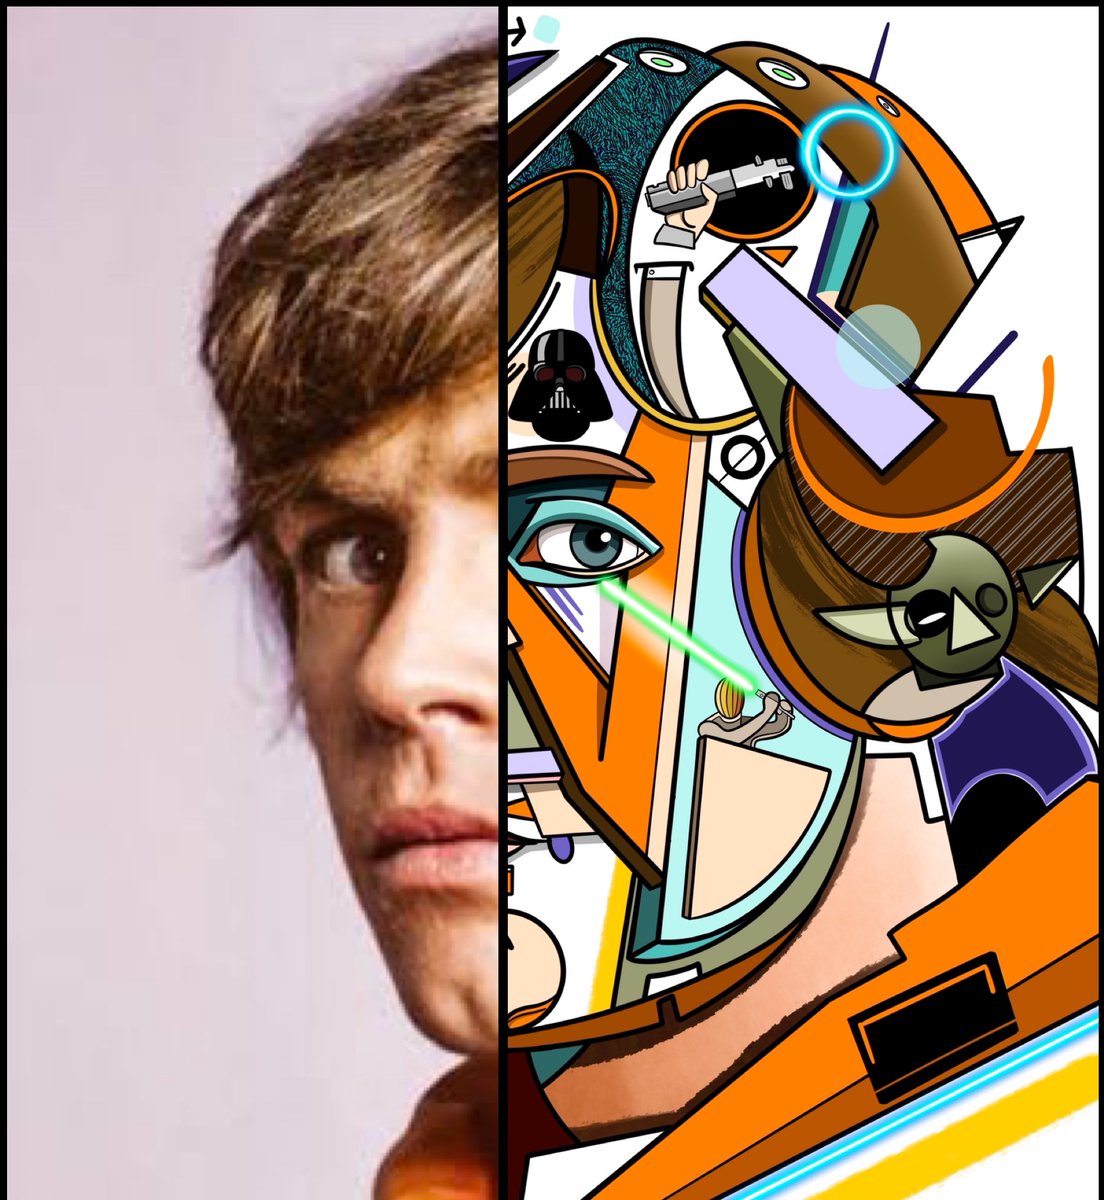 Reference VS drawing “Geo Skywalker ” listed on OS.